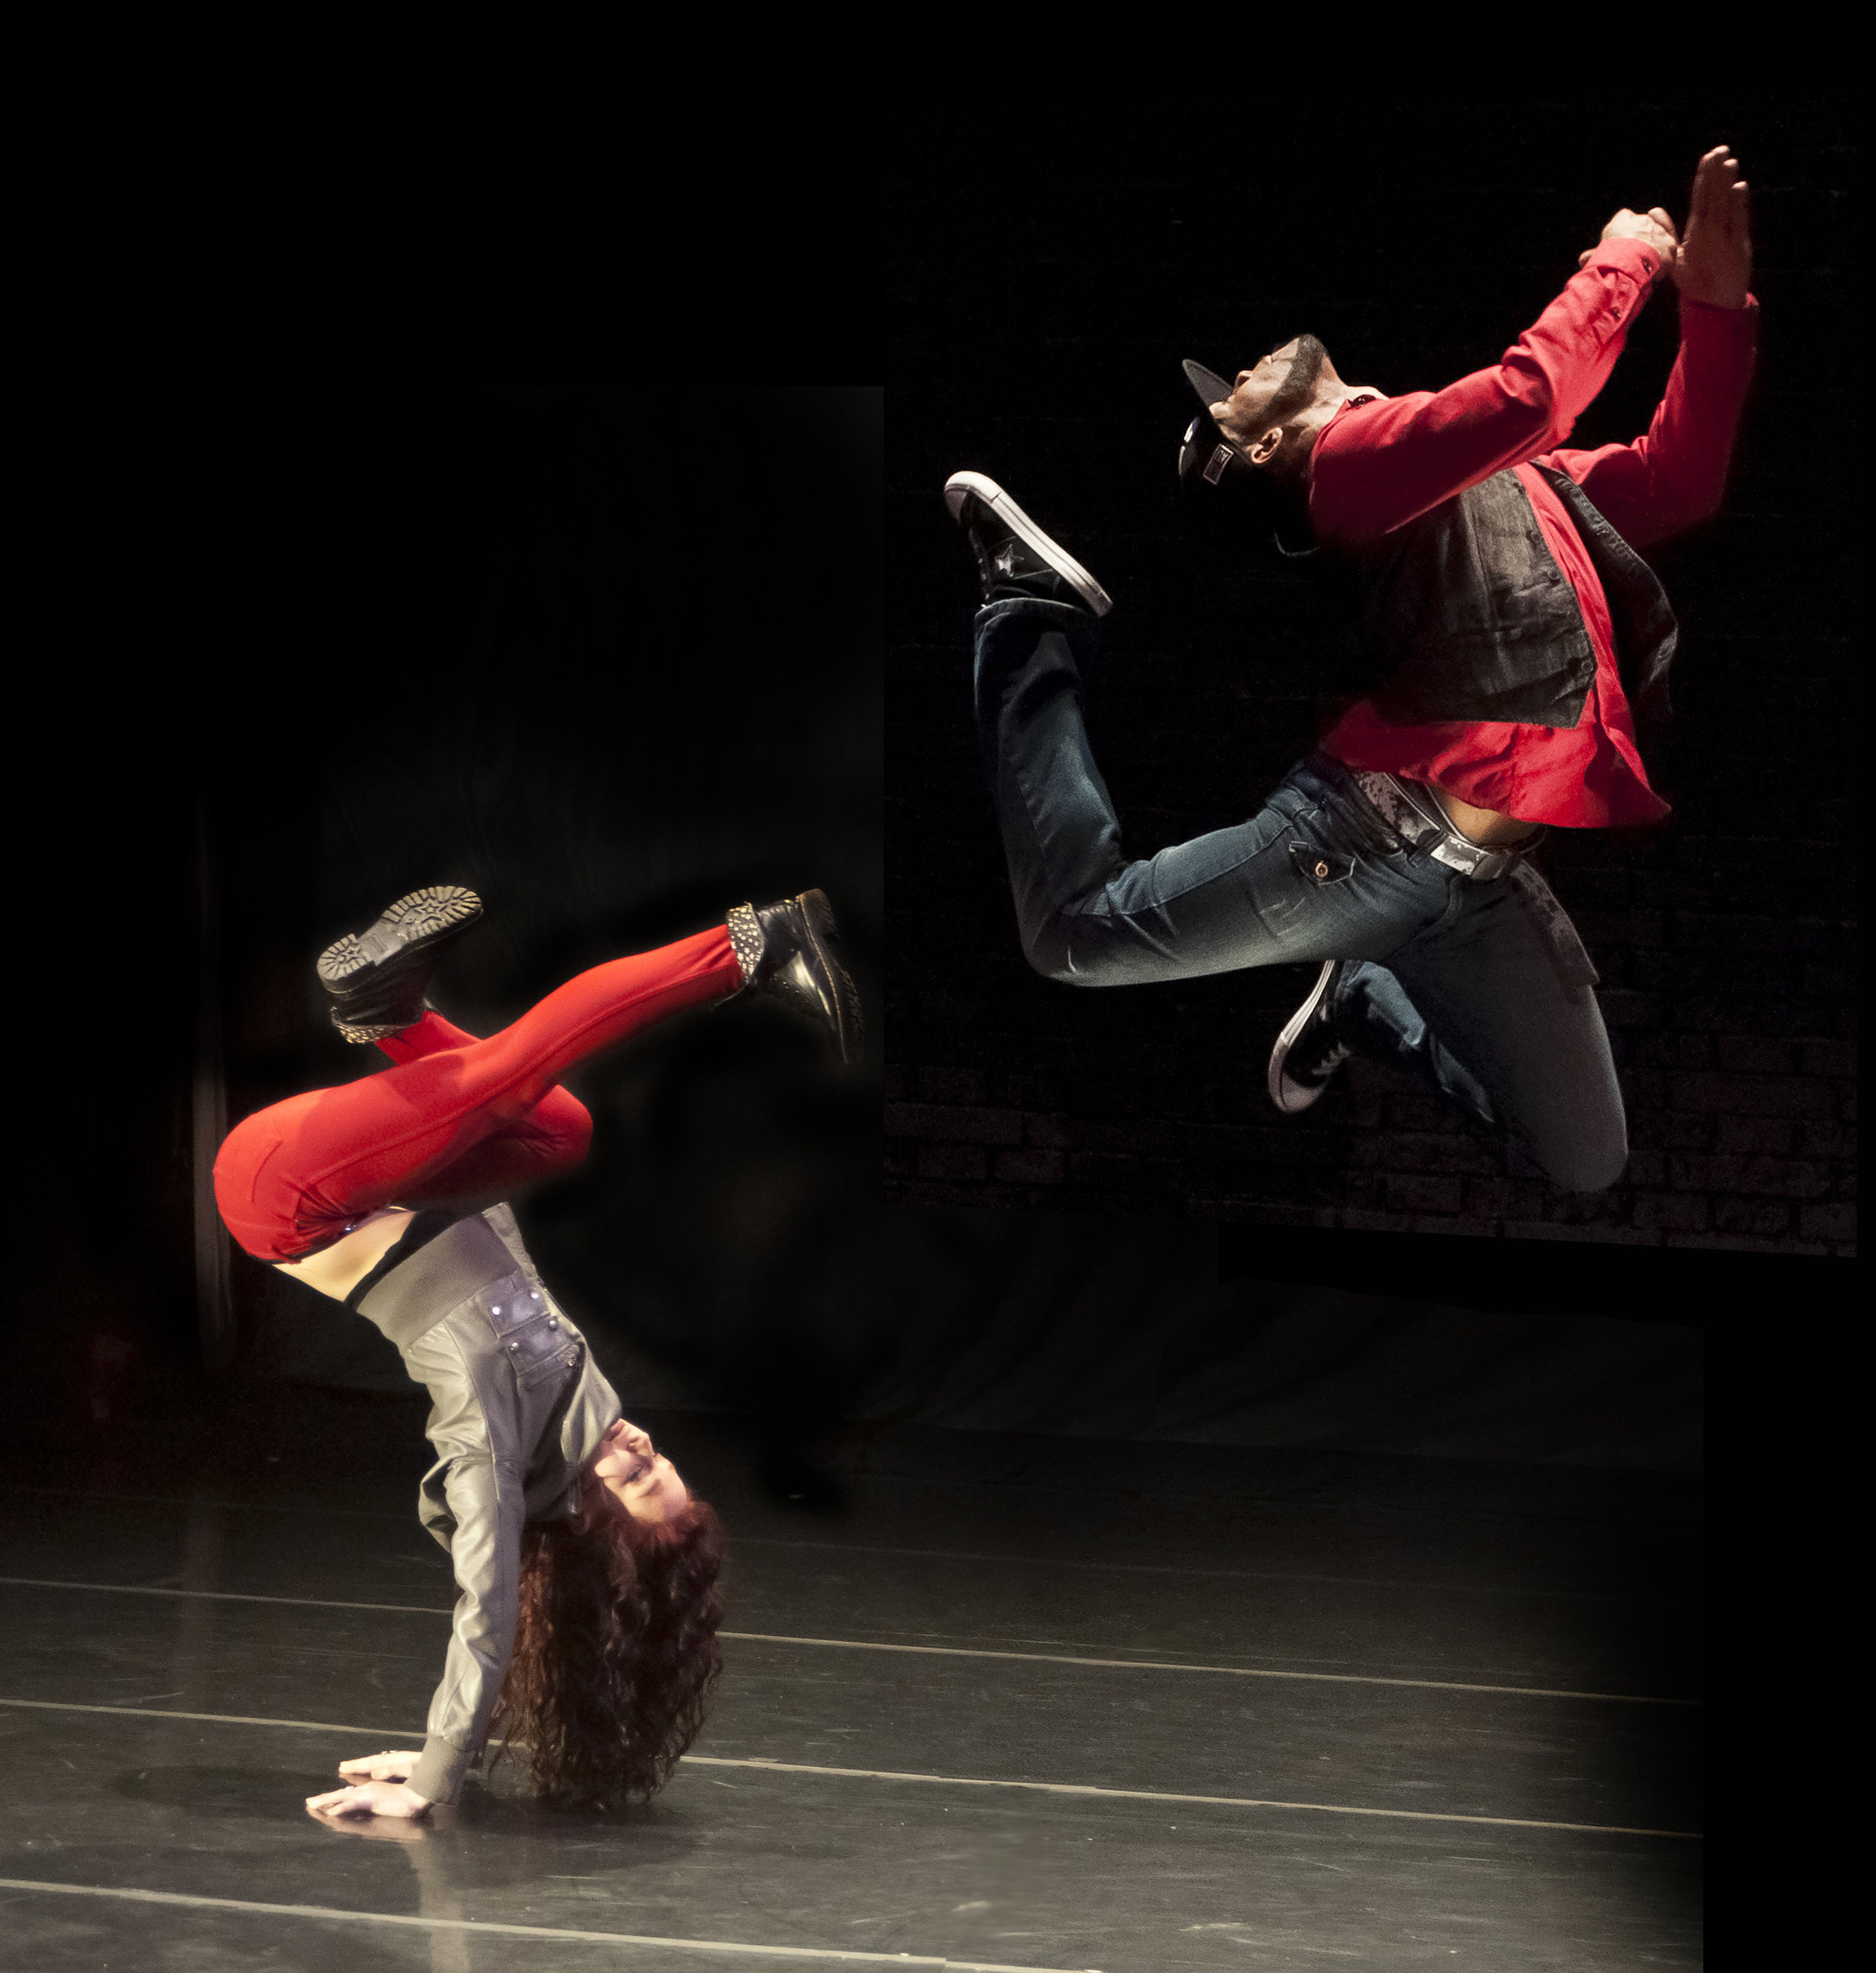 Chan_and_David_Chicago Dance Crash_photo by Emily Coughlin_1.jpg